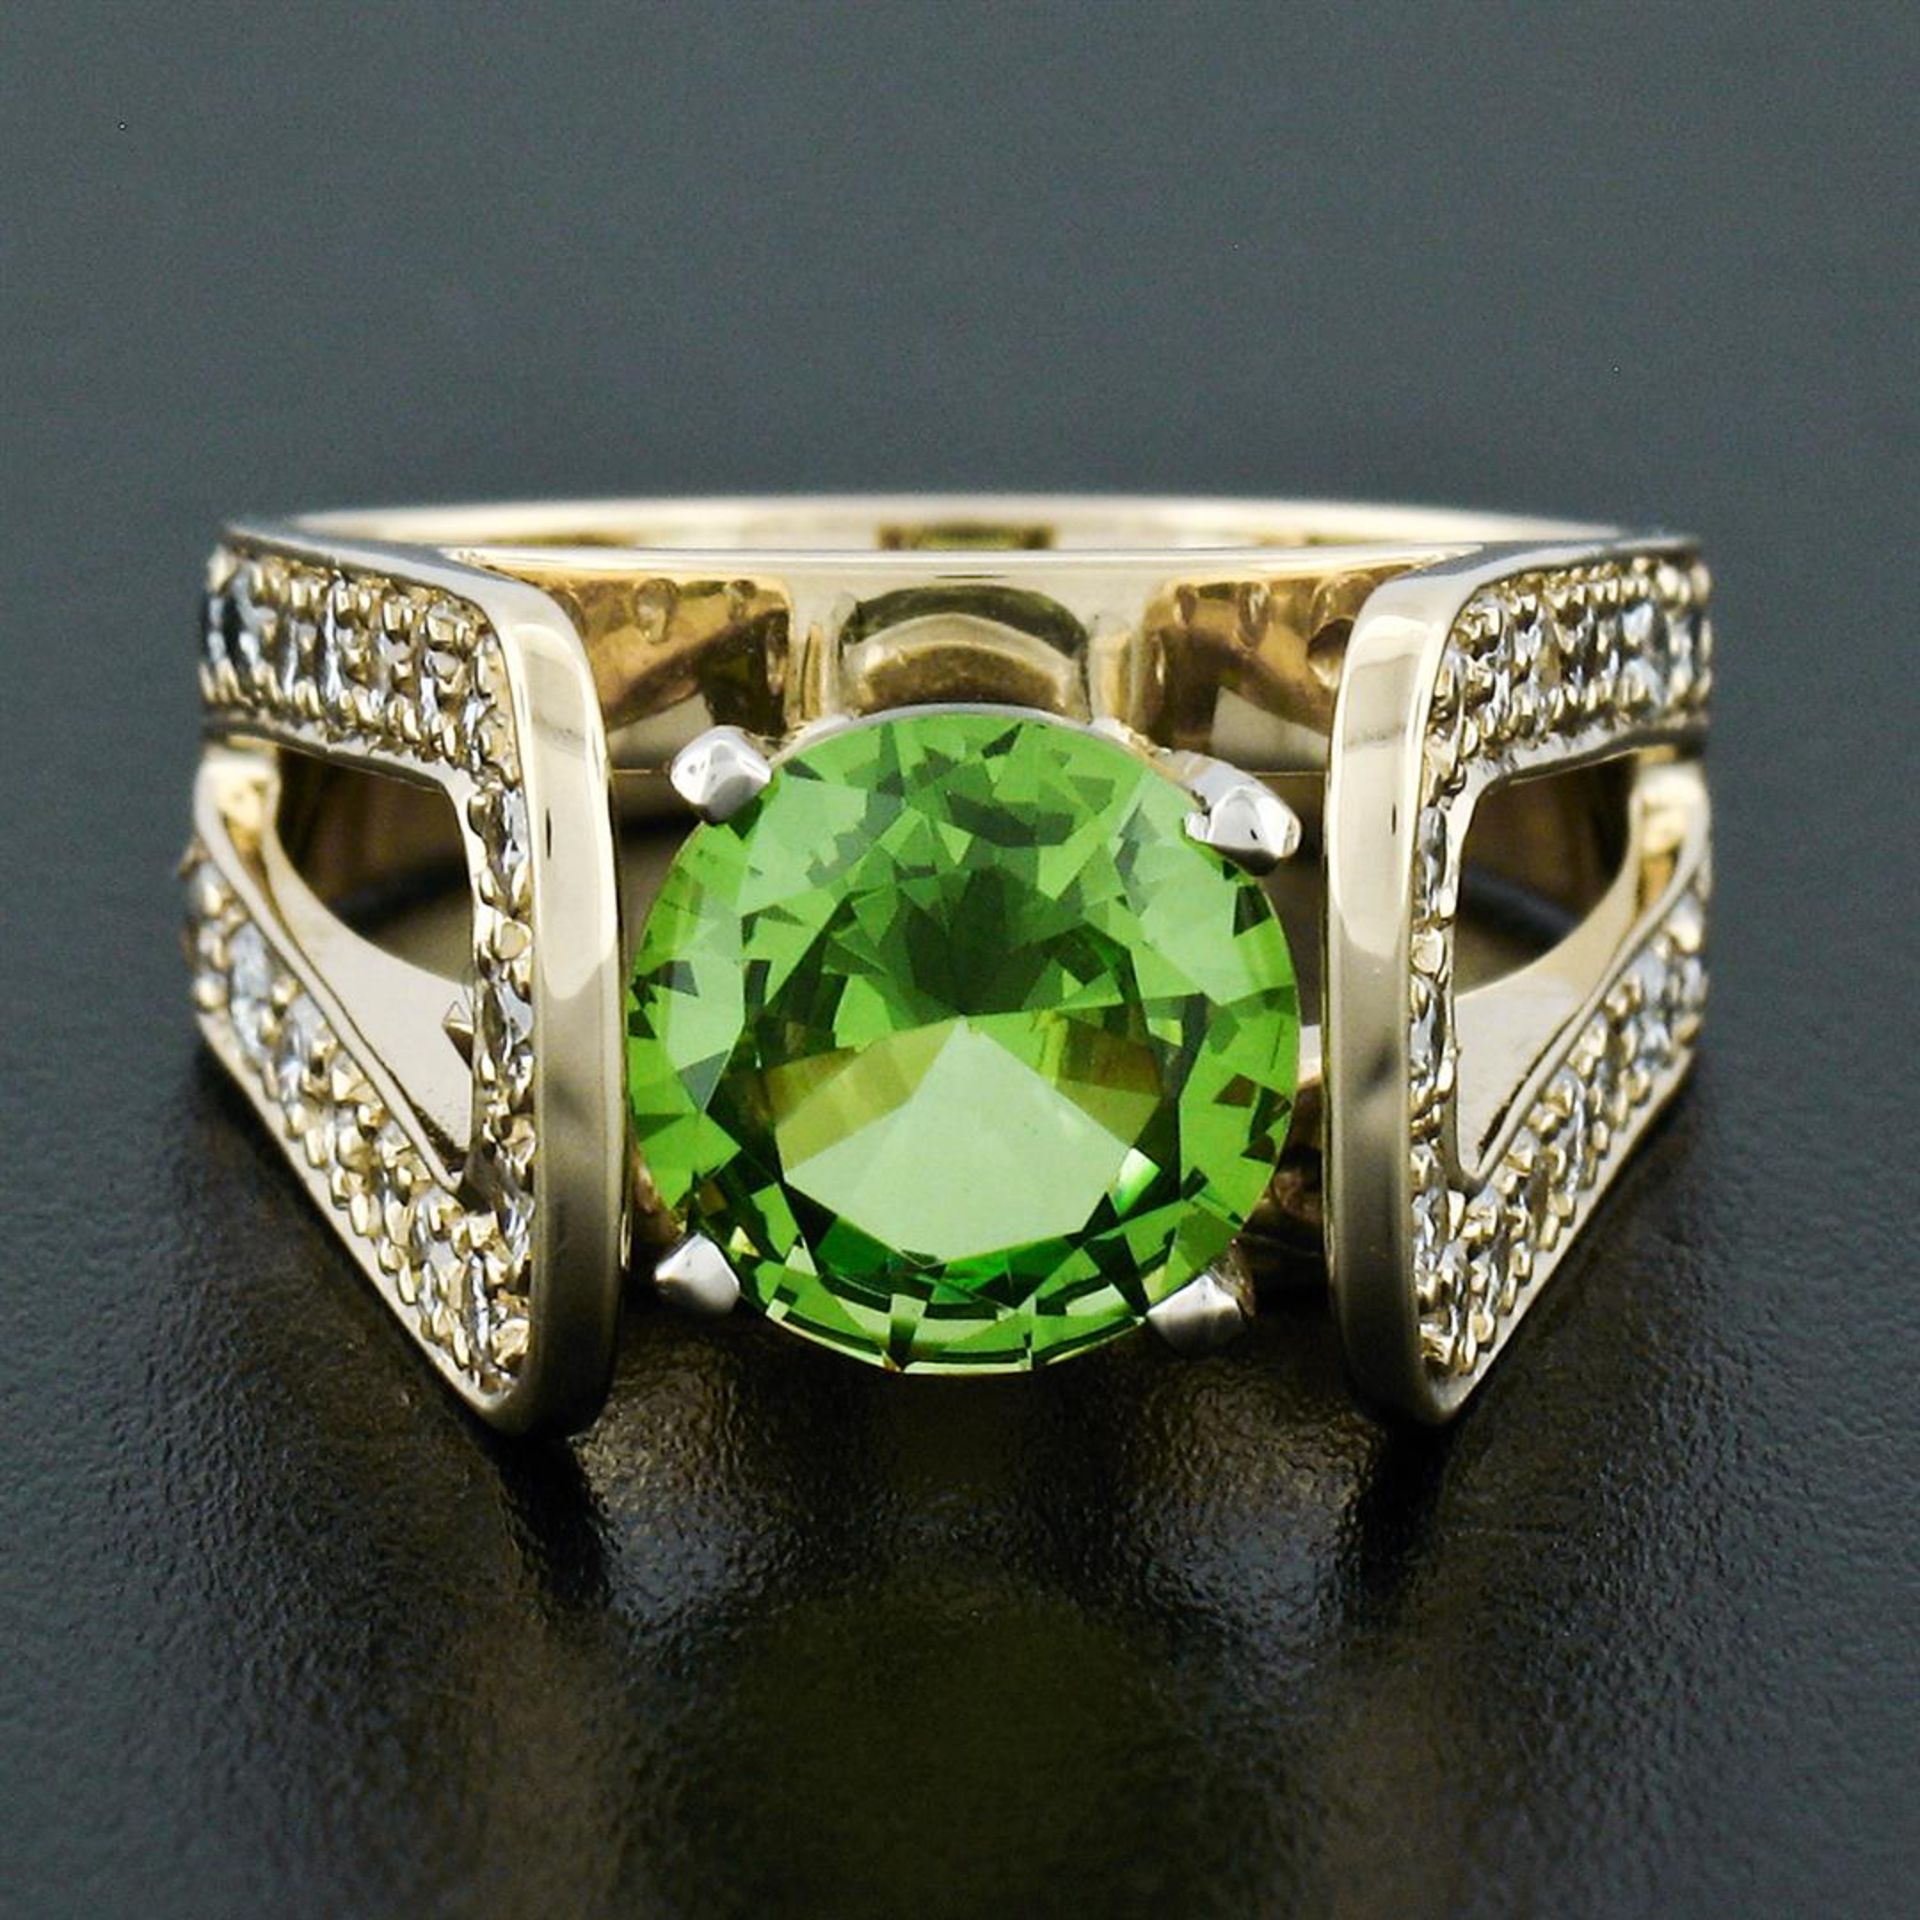 14k Yellow Gold 3.0ctw Round Peridot Solitaire & Ideal Cut Diamond Cocktail Ring - Image 2 of 9